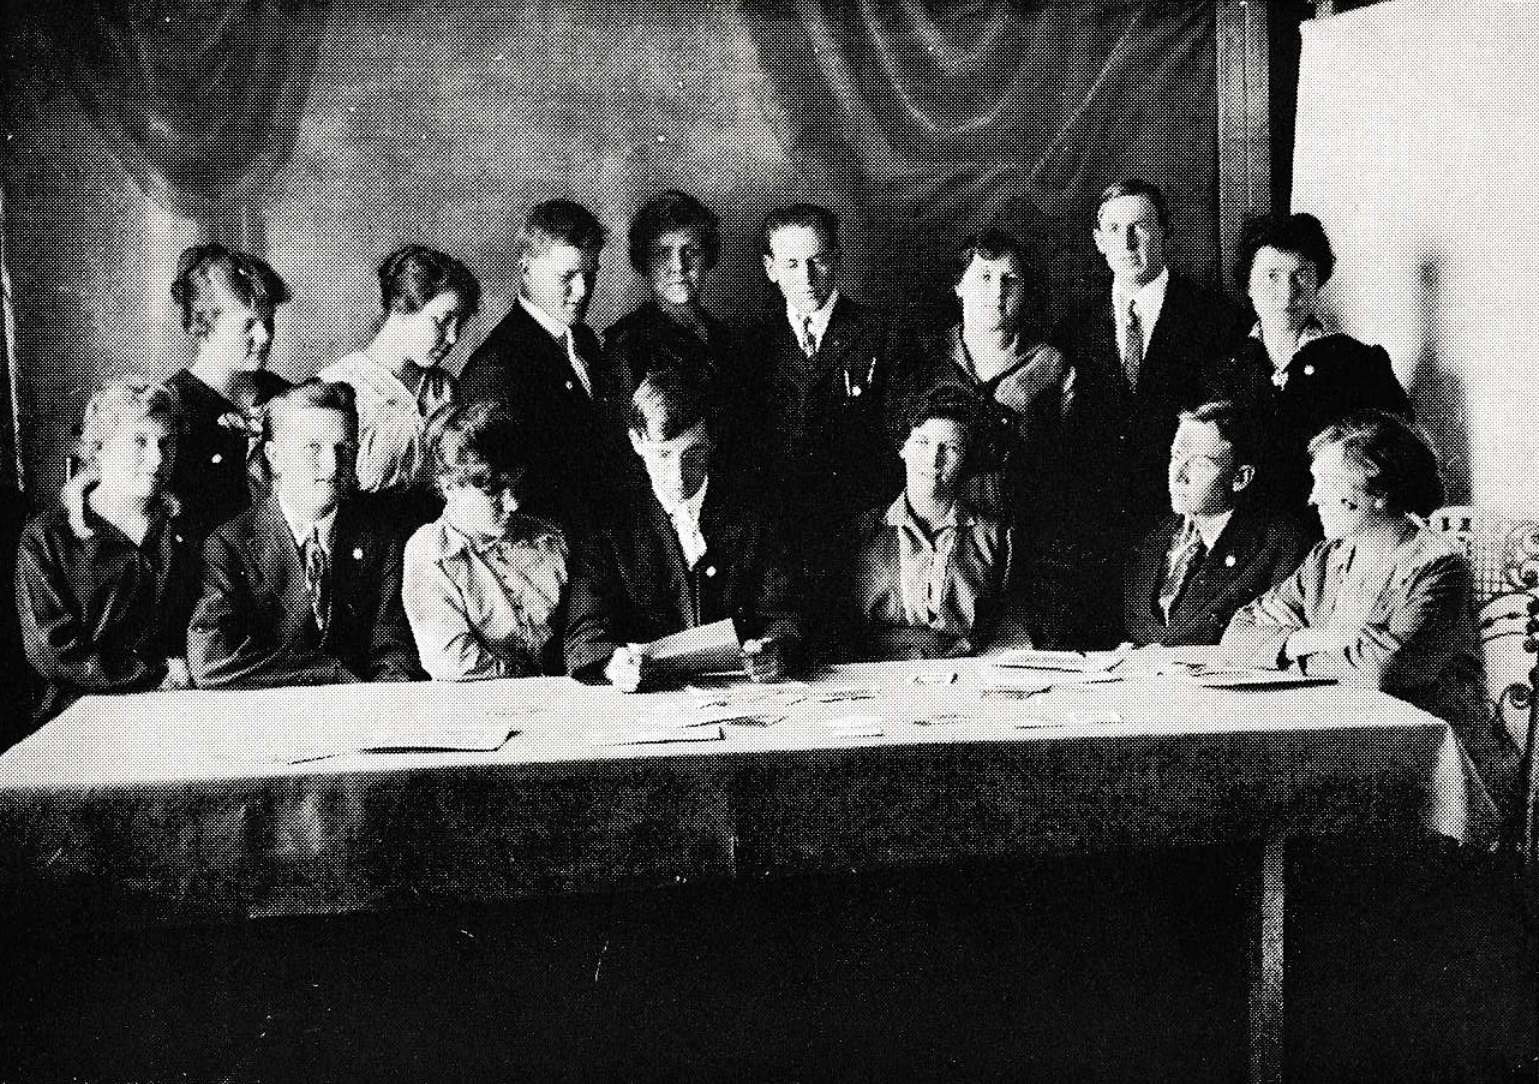 The Dixie Normal College 'United Dixie Club Officers' in 1915-1916